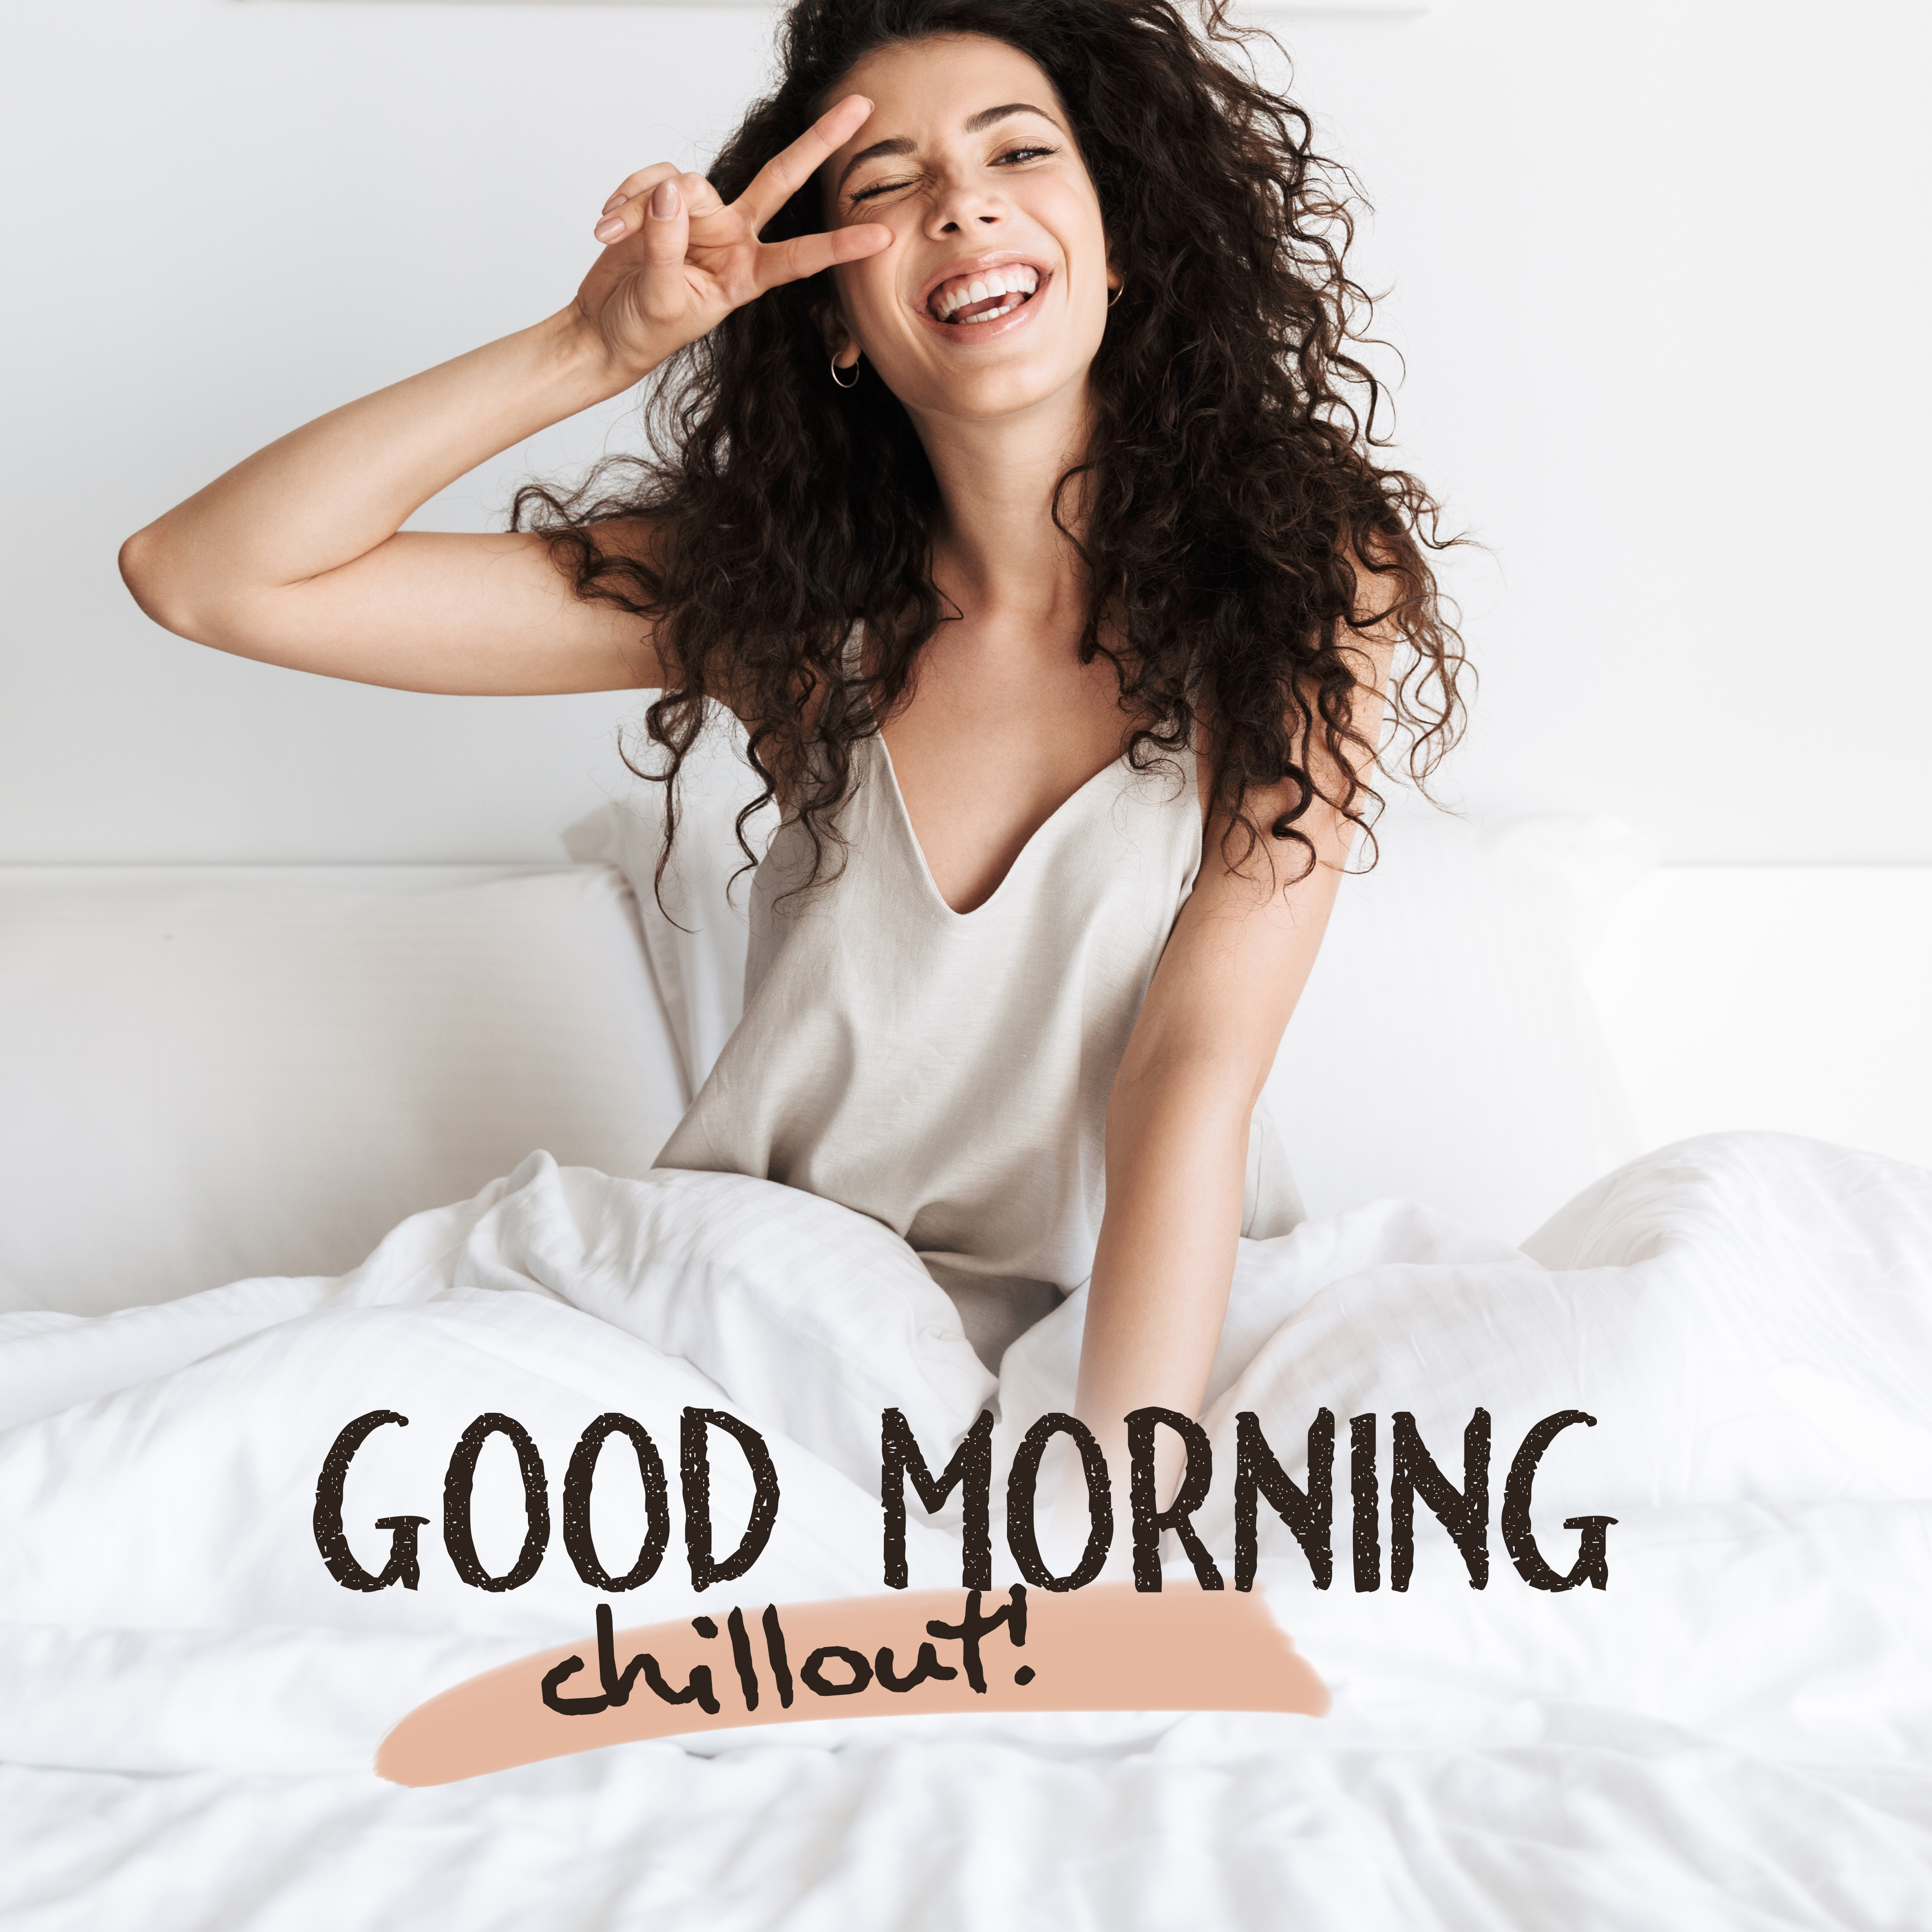 Good Morning, Chillout! - 15 Fresh 2019 Chillout Vibes to Start a Day Perfectly